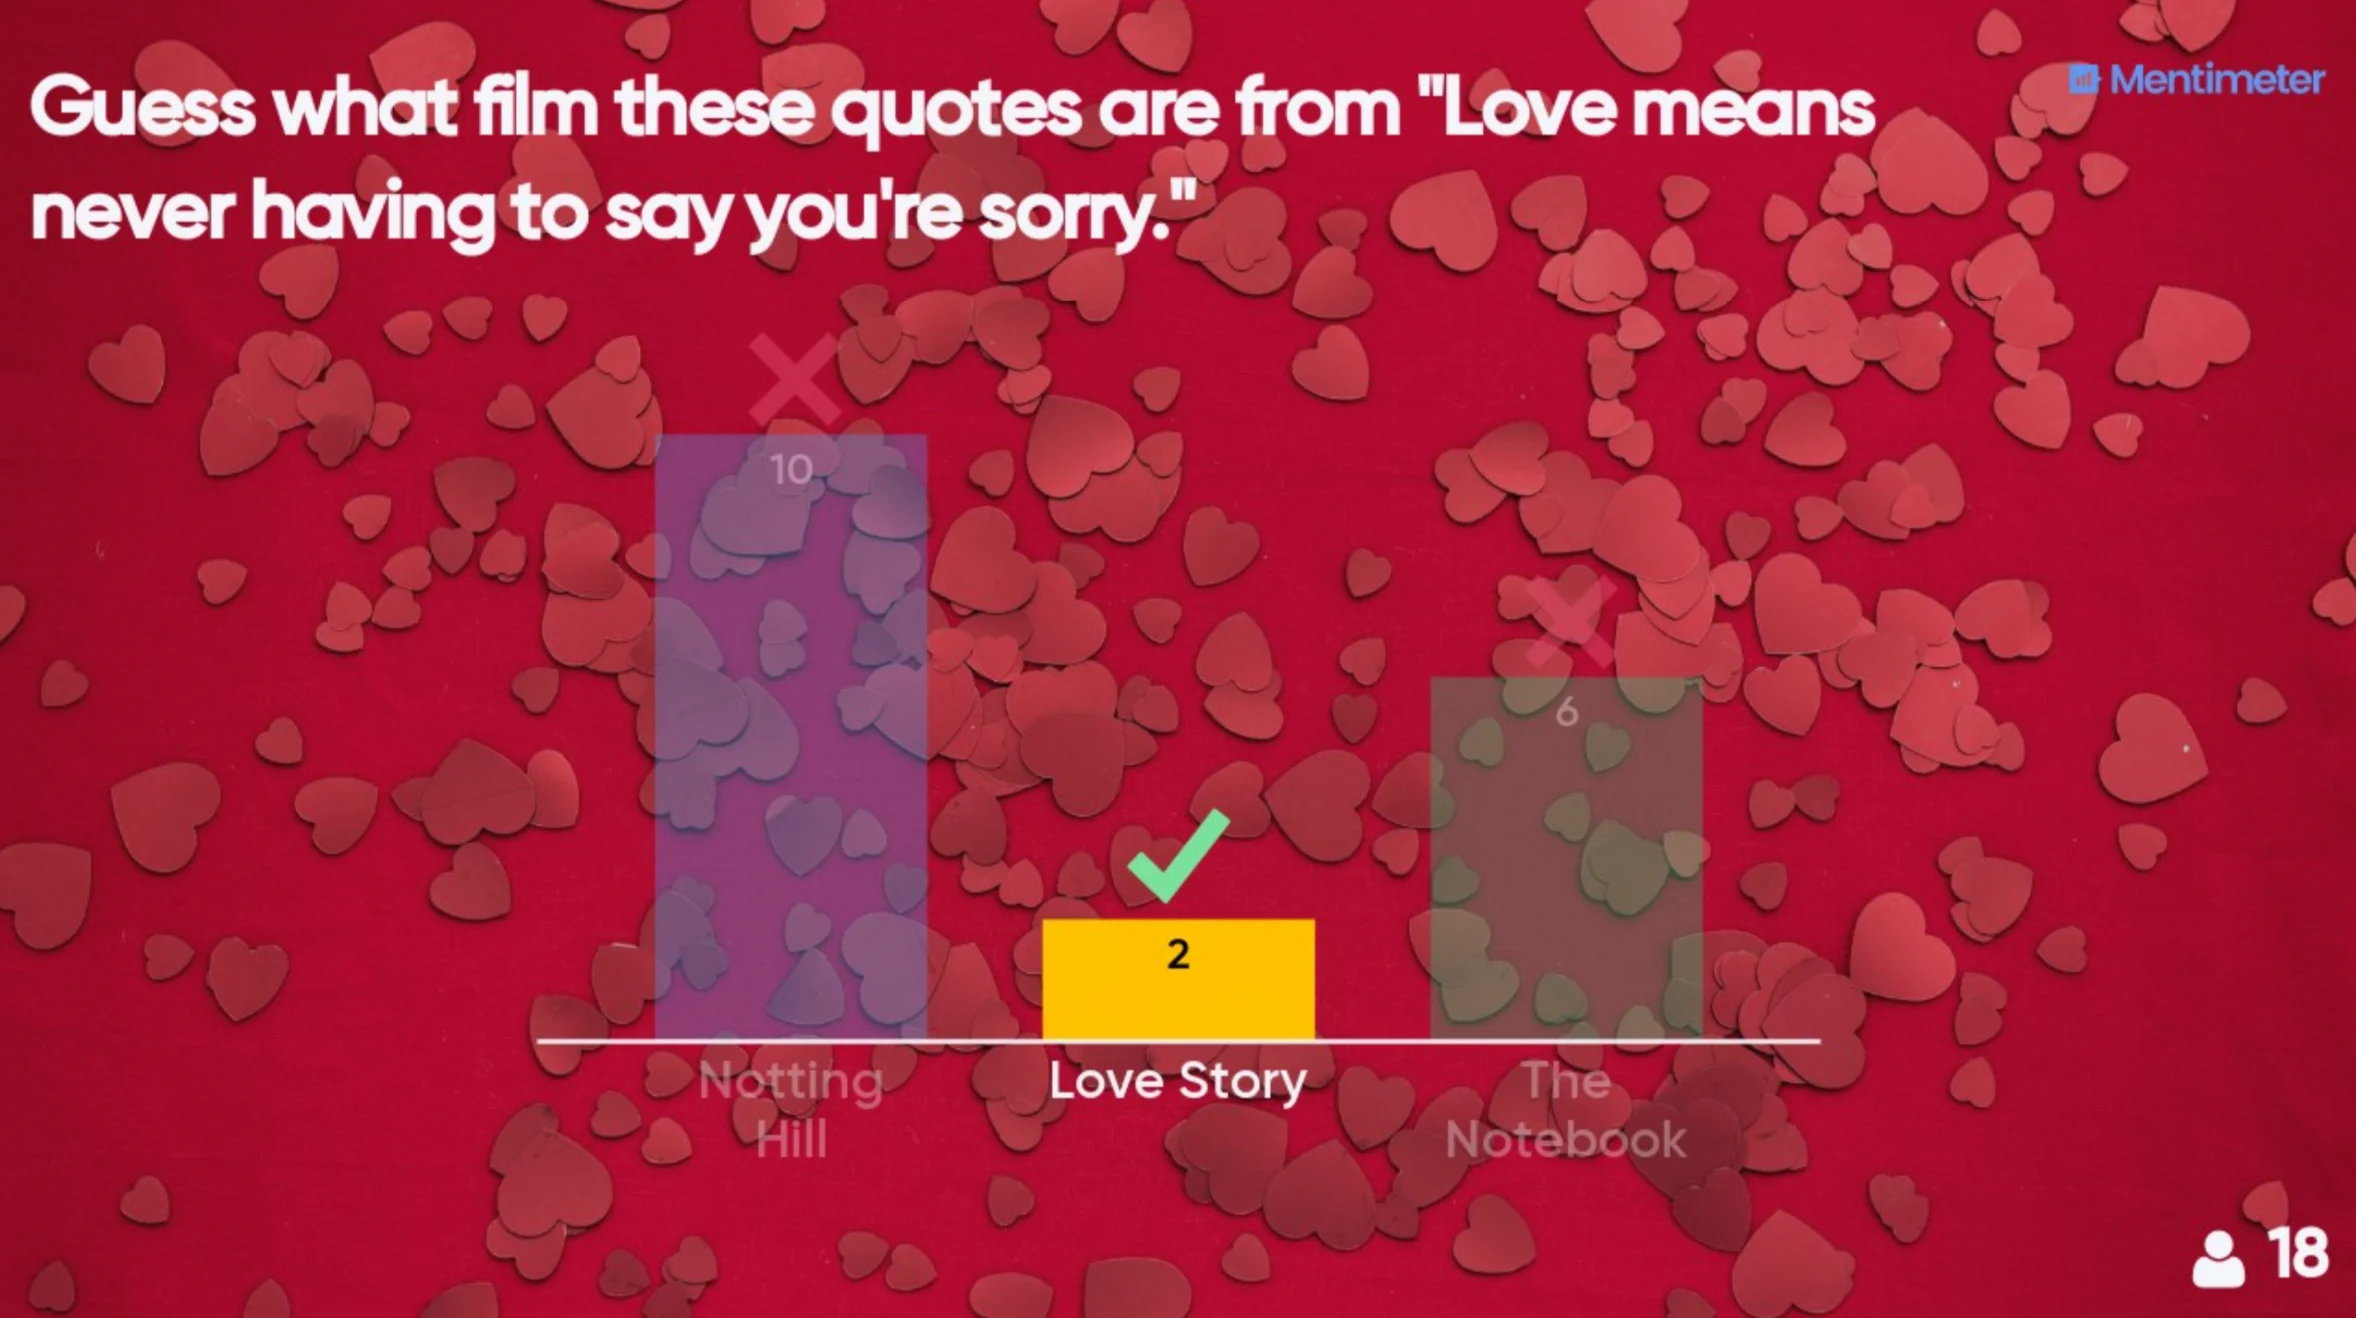 Guess what film these quotes are from "Love means never having to say you're sorry"